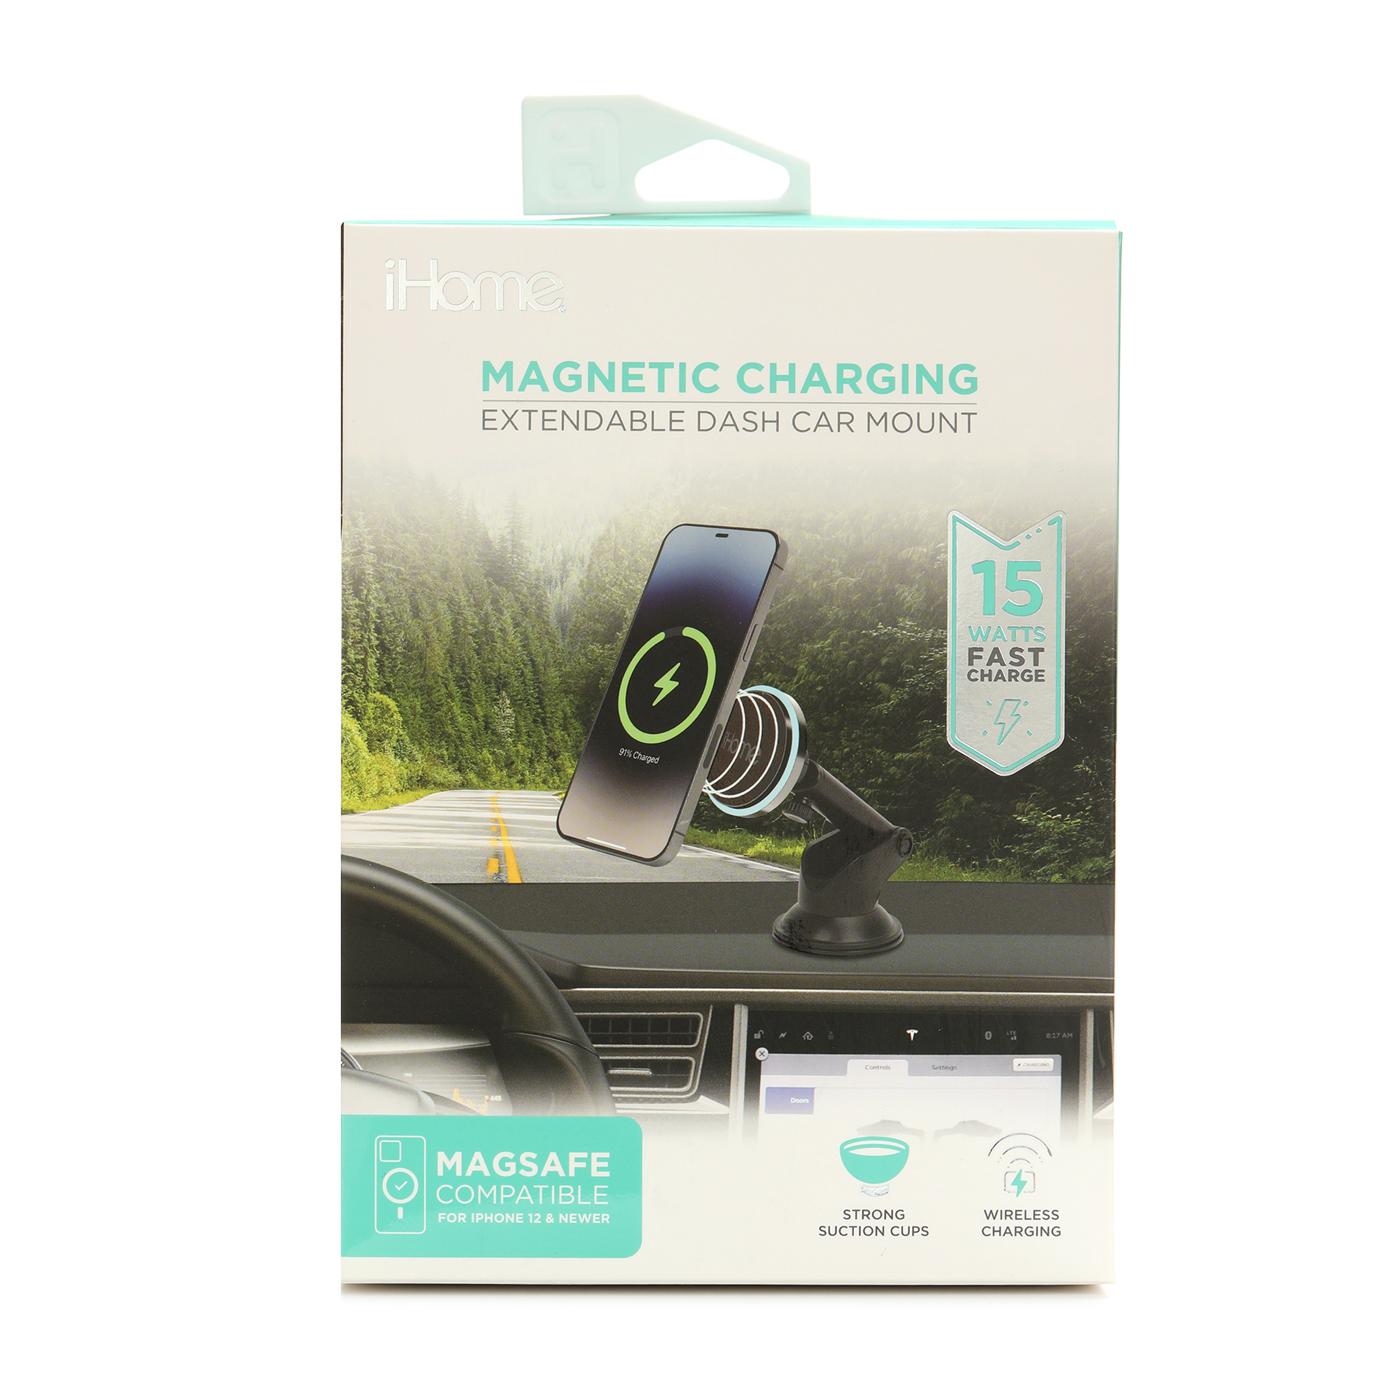 iHome Magnetic Charging Extendable Dash Car Mount - Black; image 1 of 2